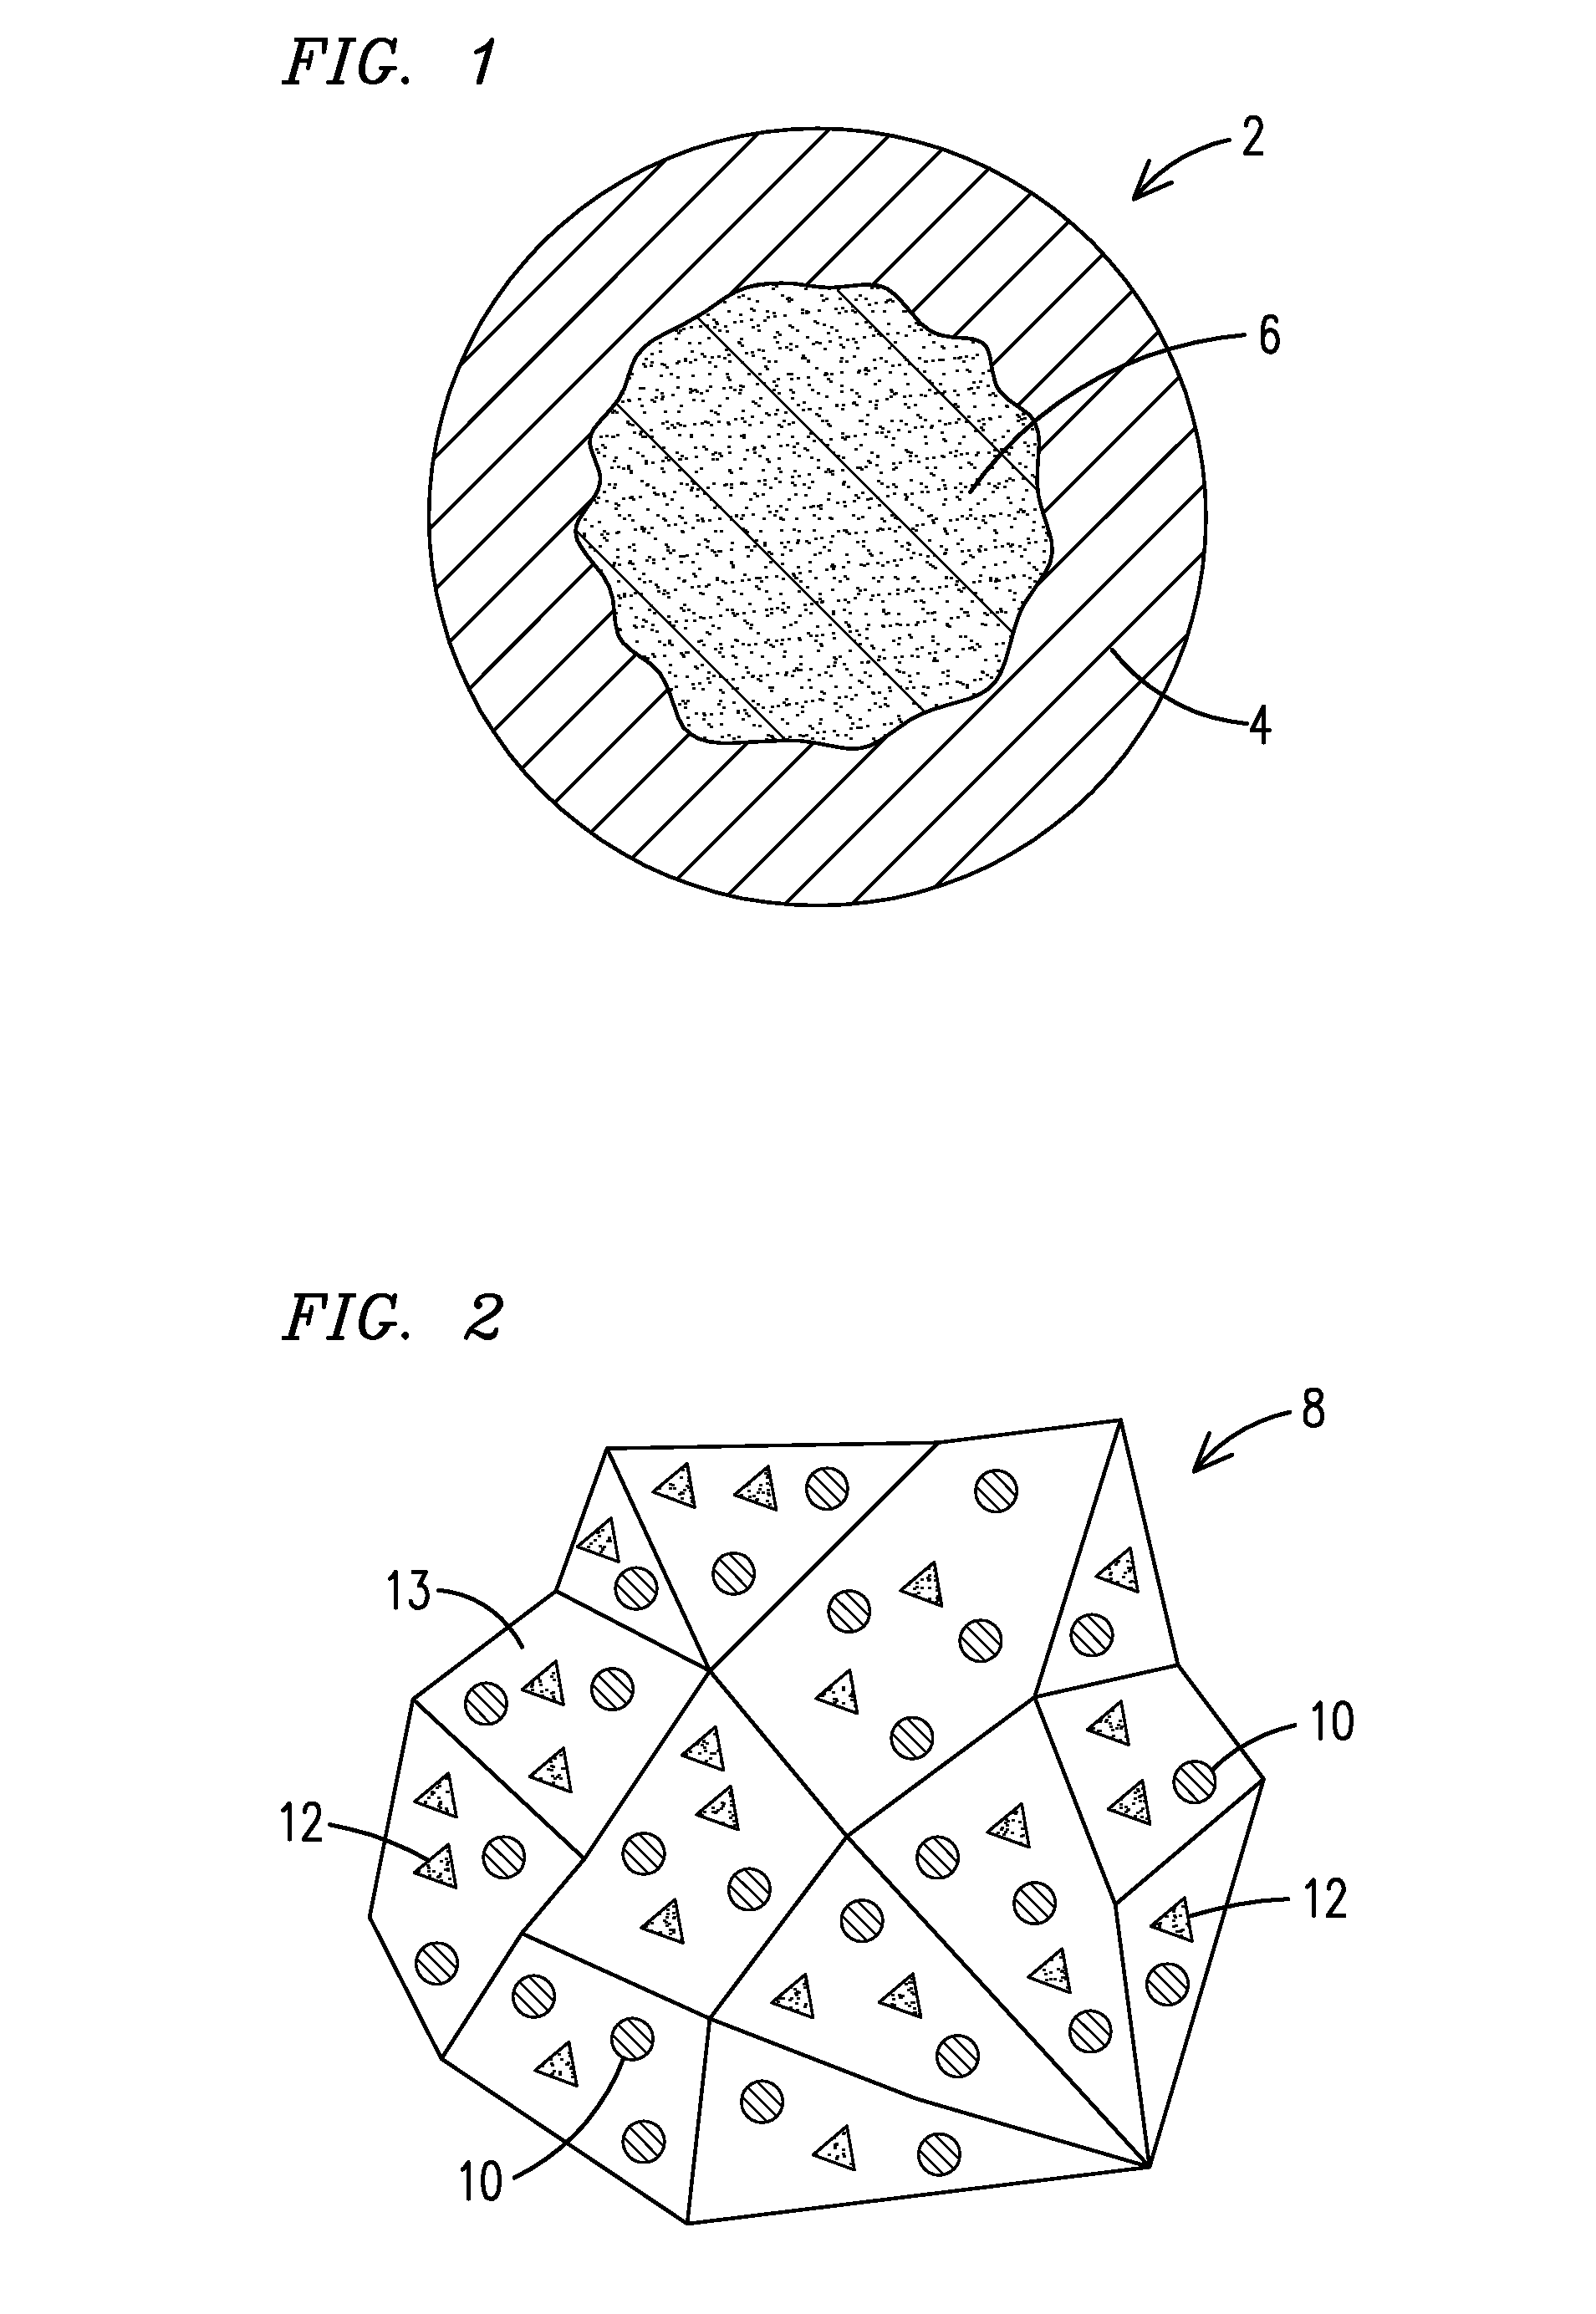 Composite materials and methods for laser manufacturing and repair of metals